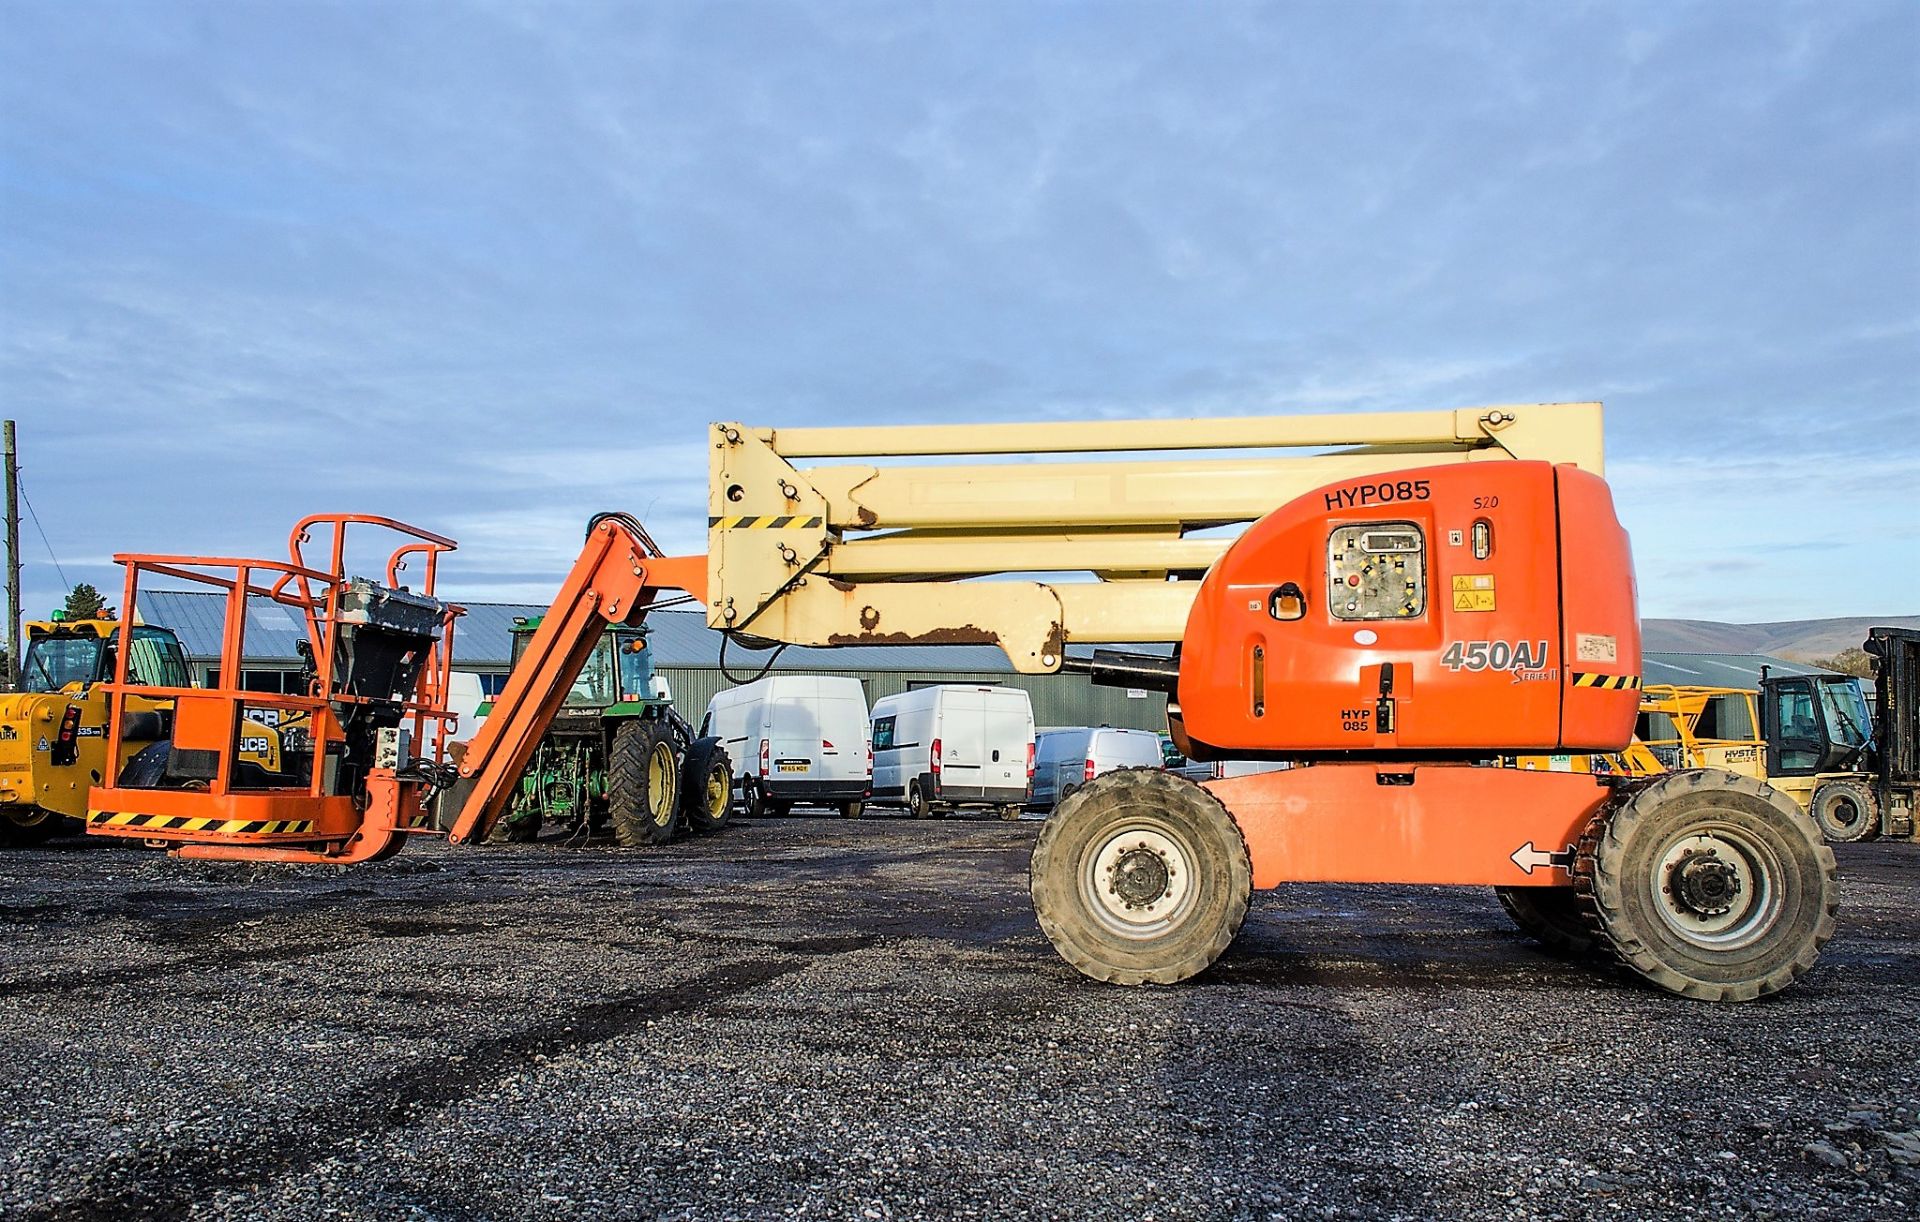 JLG 450AJ diesel driven rough terrain articulated boom access platform Year: 2007 S/N: 5190 Recorded - Image 7 of 17